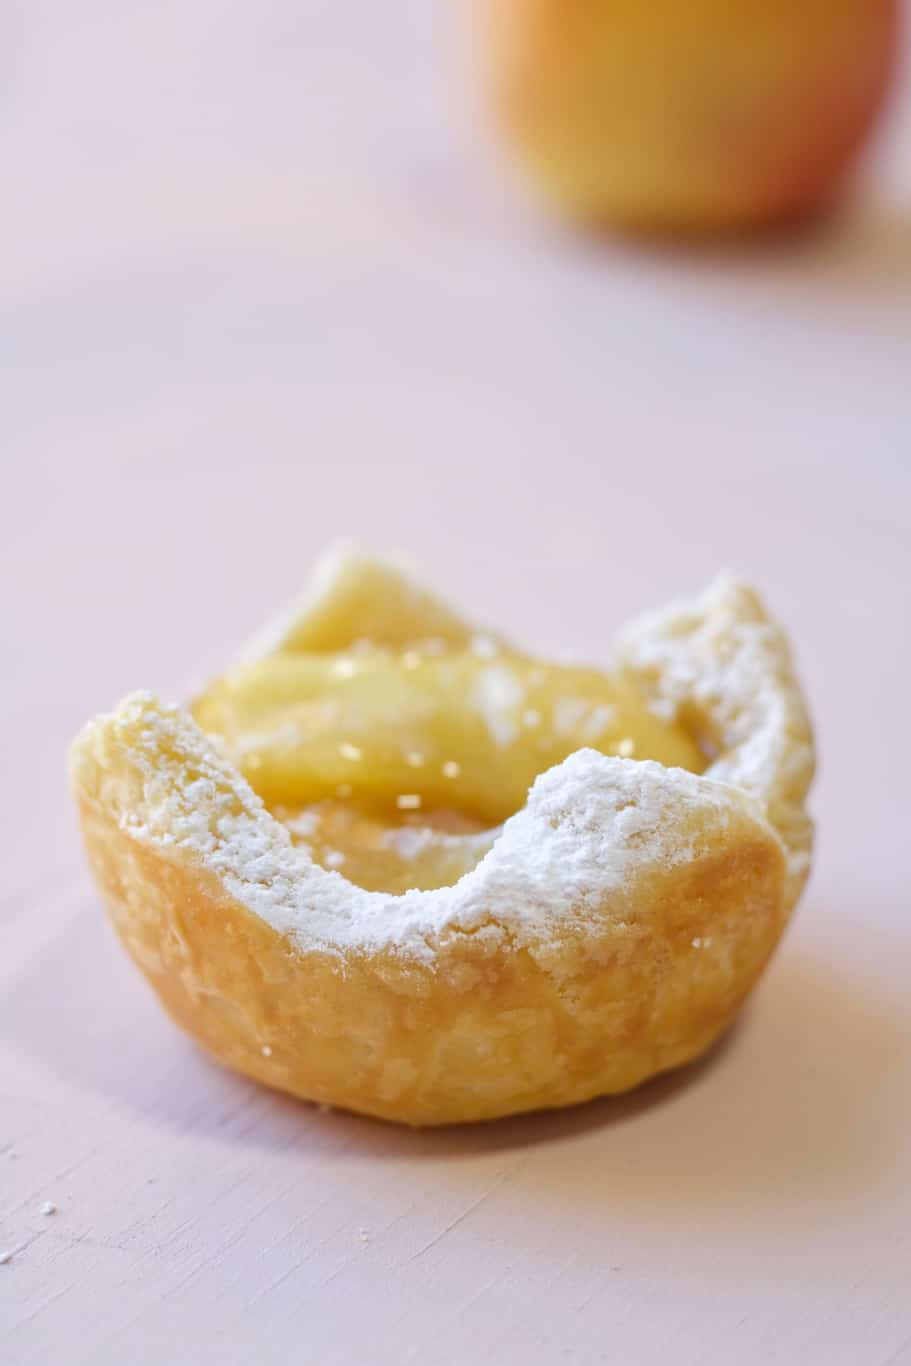 a mini apple tart made with puff pastry and sweet apple filling and served with powdered white sugar on its golden flaky edges